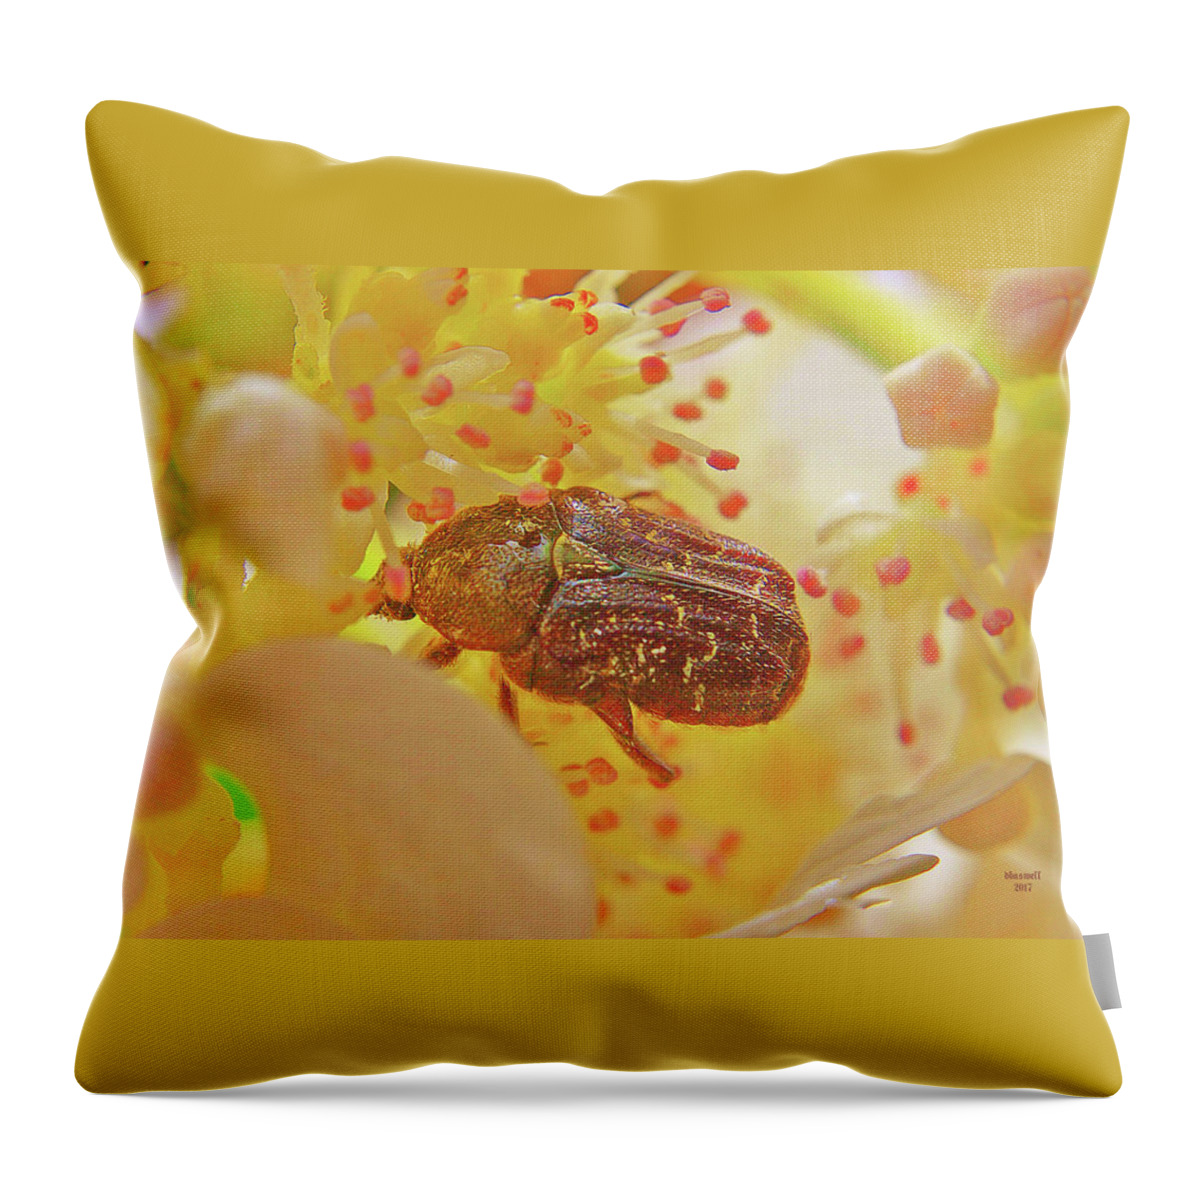 Inside The Plant Universe Throw Pillow featuring the photograph Plant Universe by Dennis Baswell